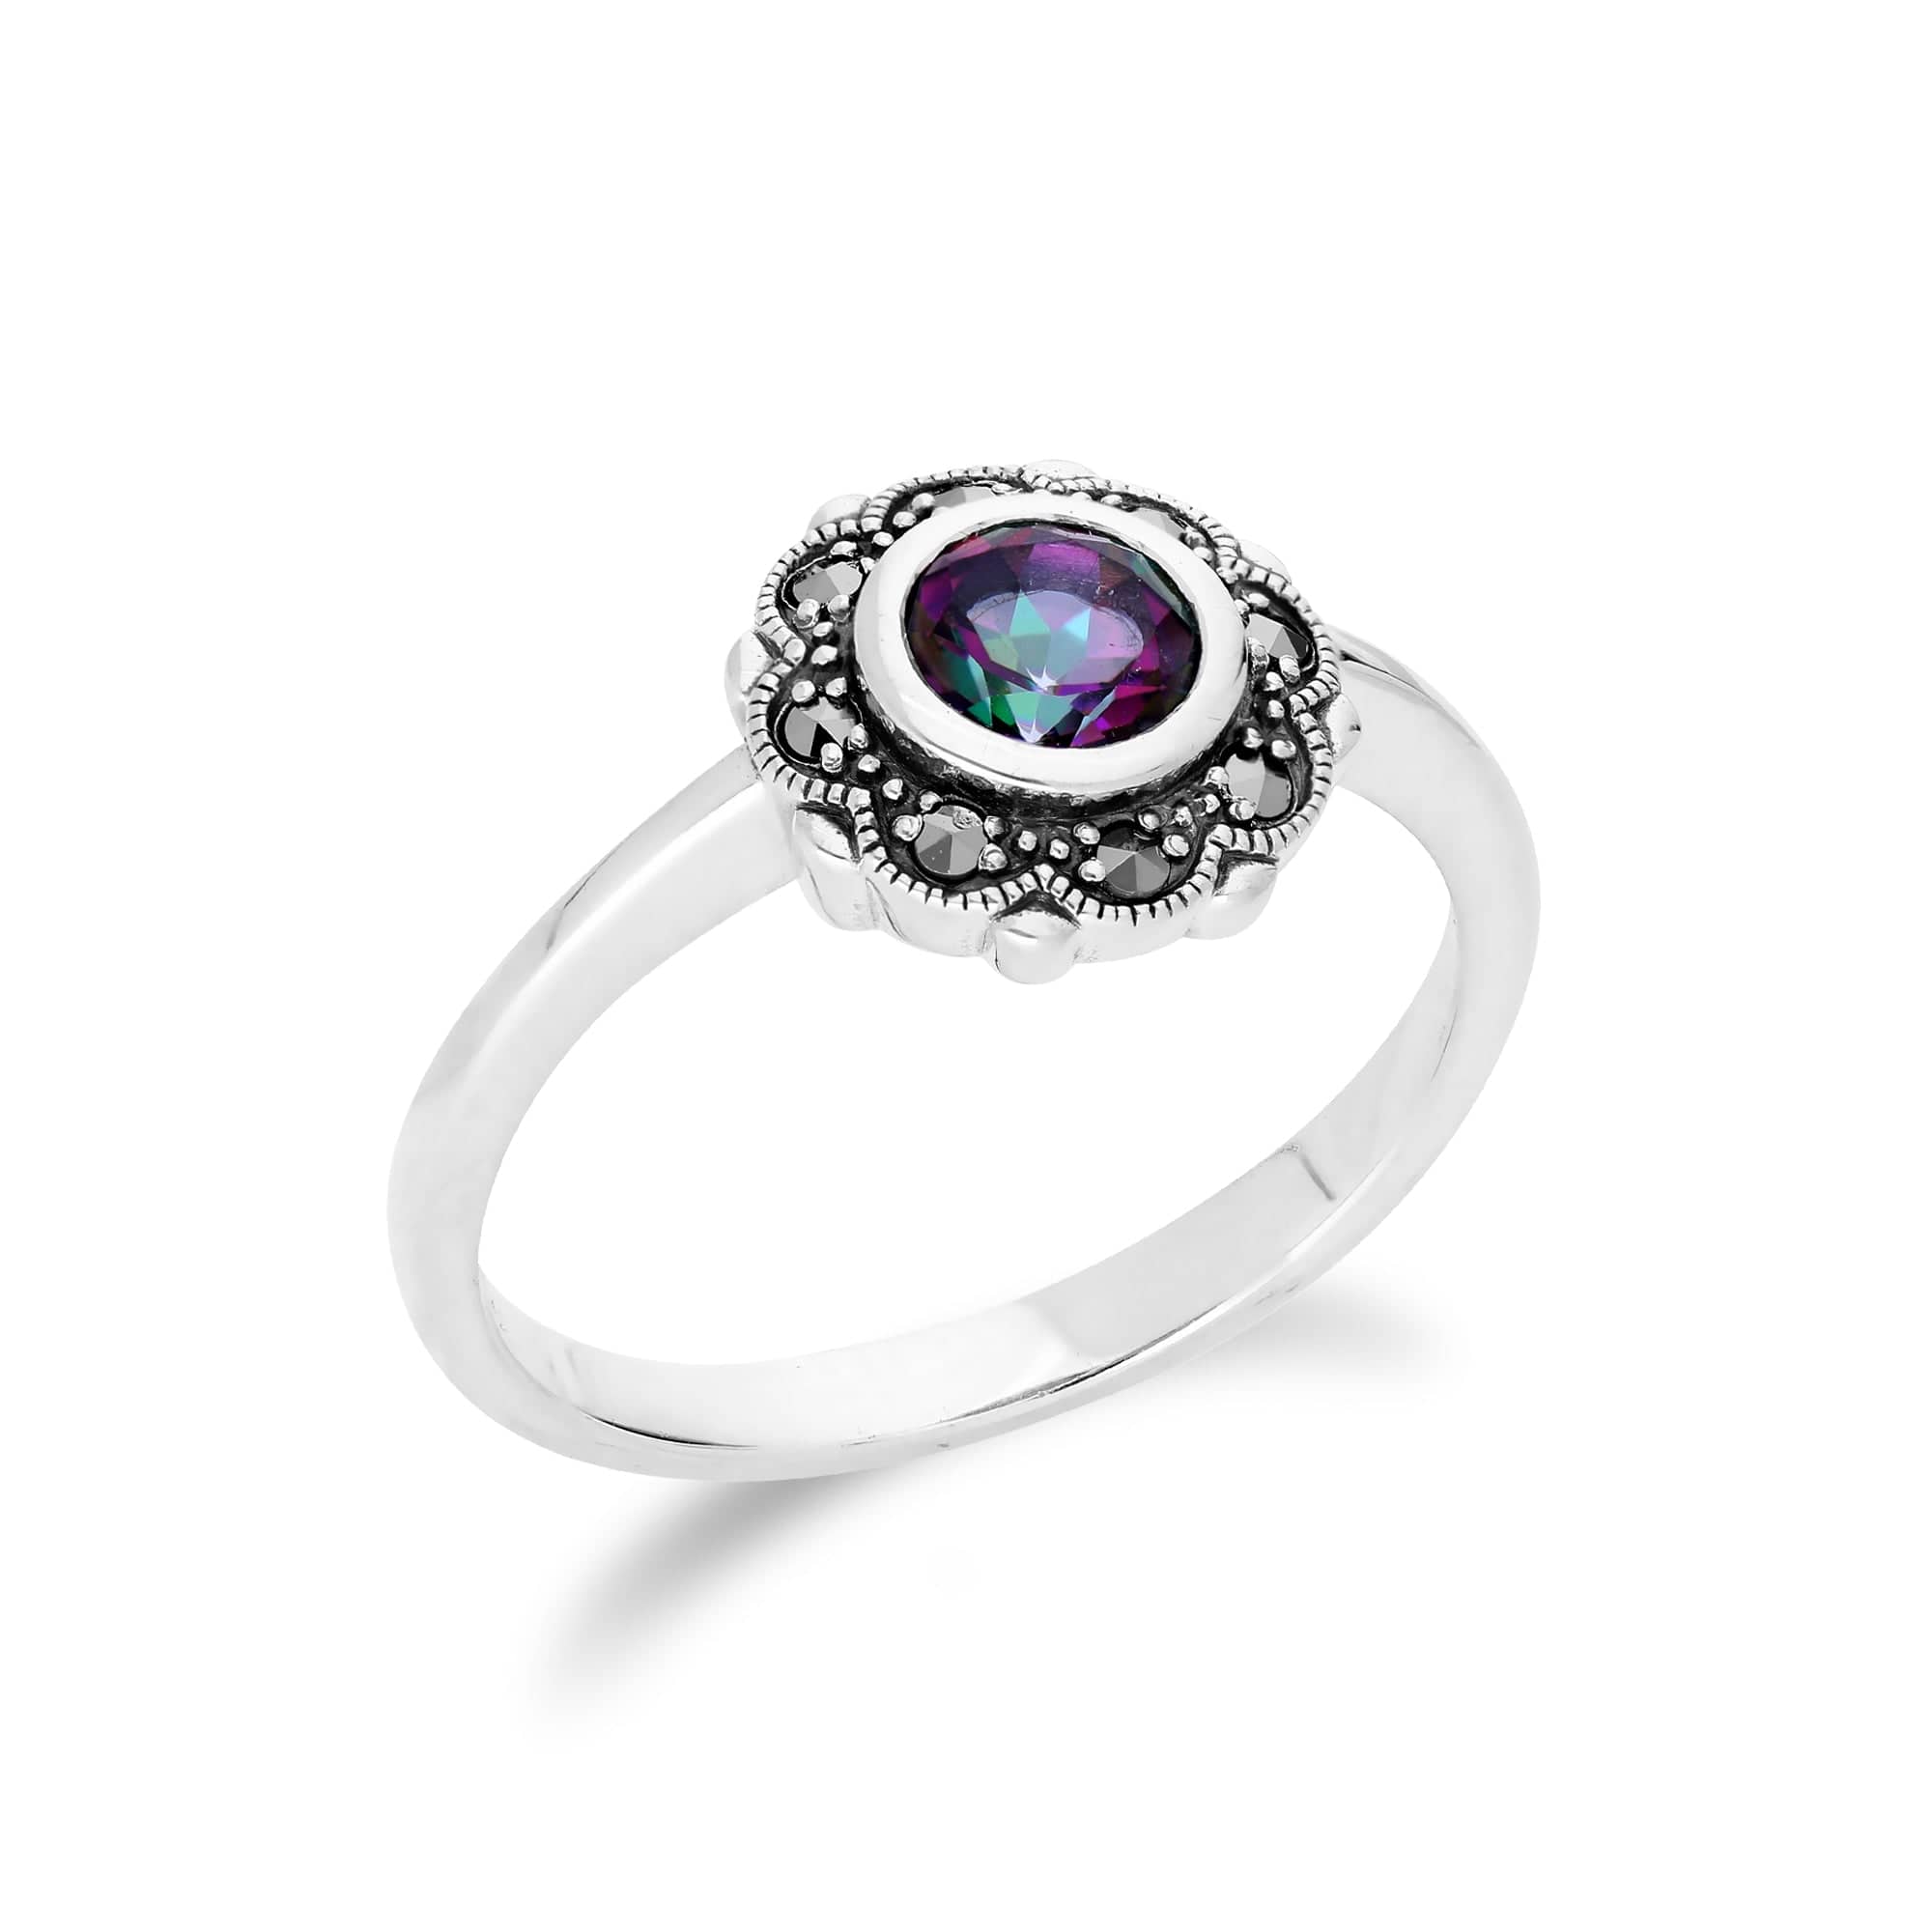 214R597005925 Floral Round Mystic Topaz & Marcasite Halo Ring in 925 Sterling Silver 2